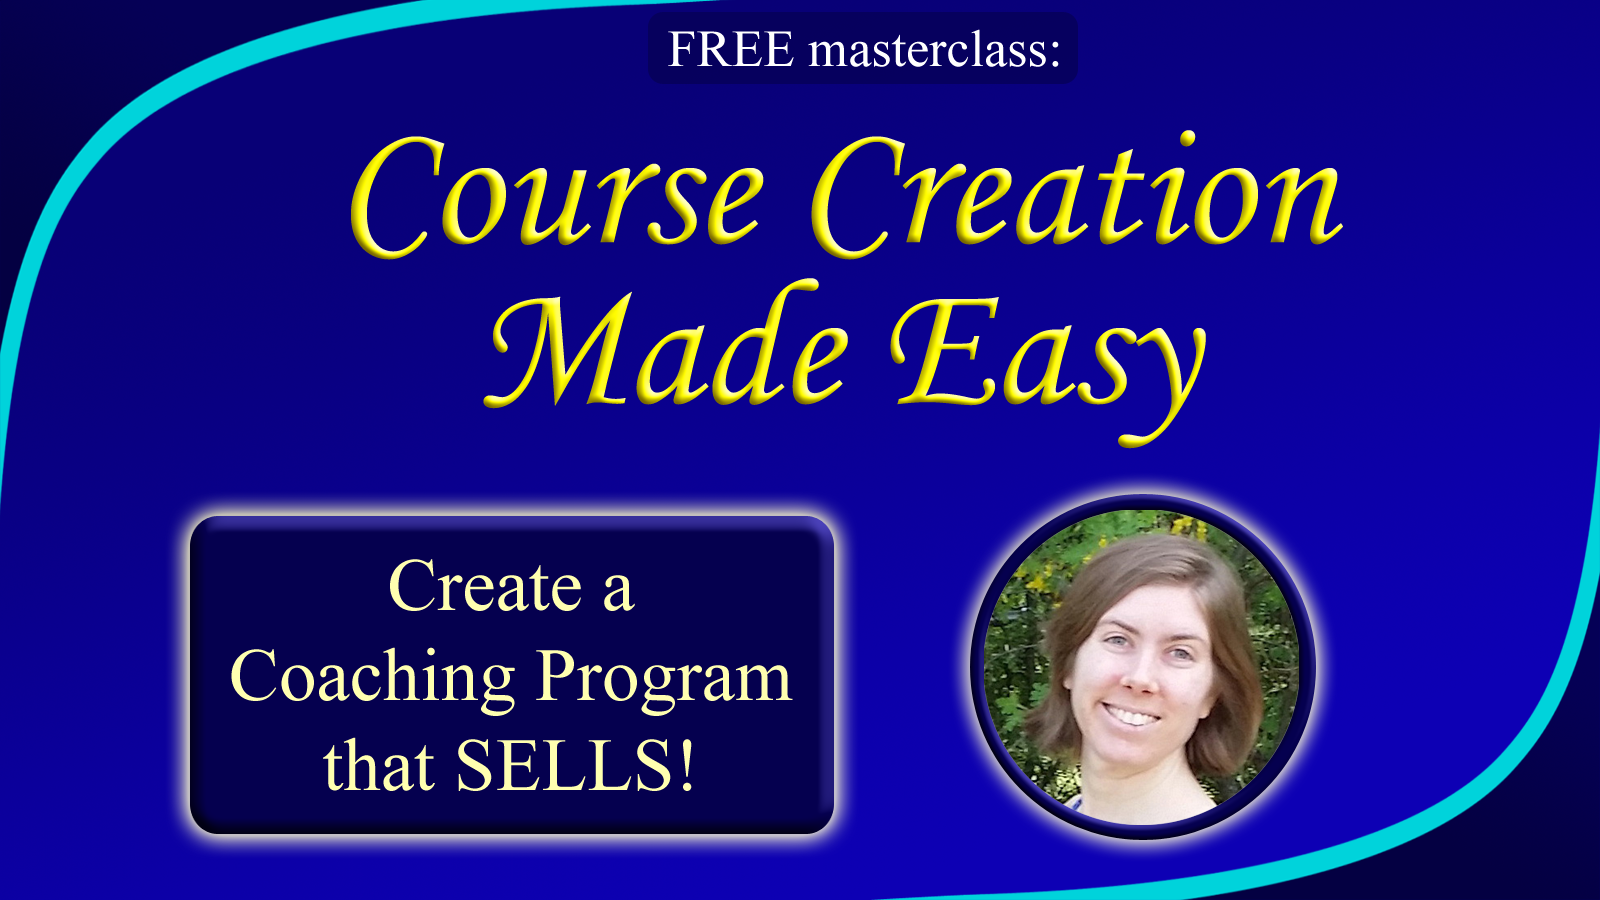 UPCOMING EVENT! Course Creation Made Easy: Create a Coaching Program that Sells!